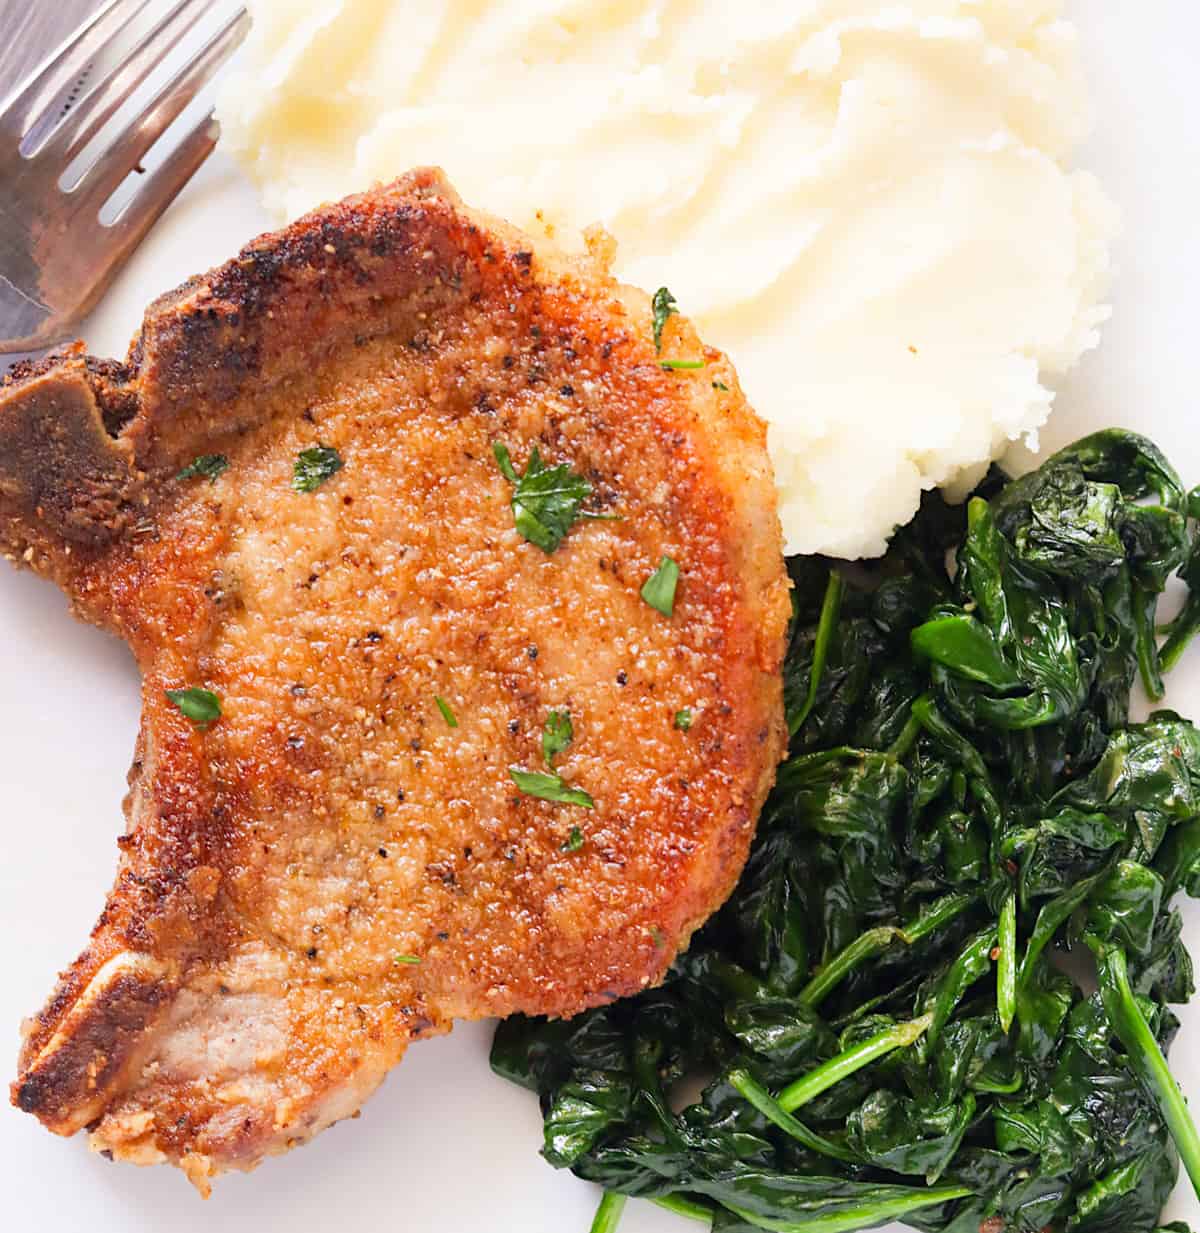 Fried pork chops with greens and mashed potatoes for incredible soul food